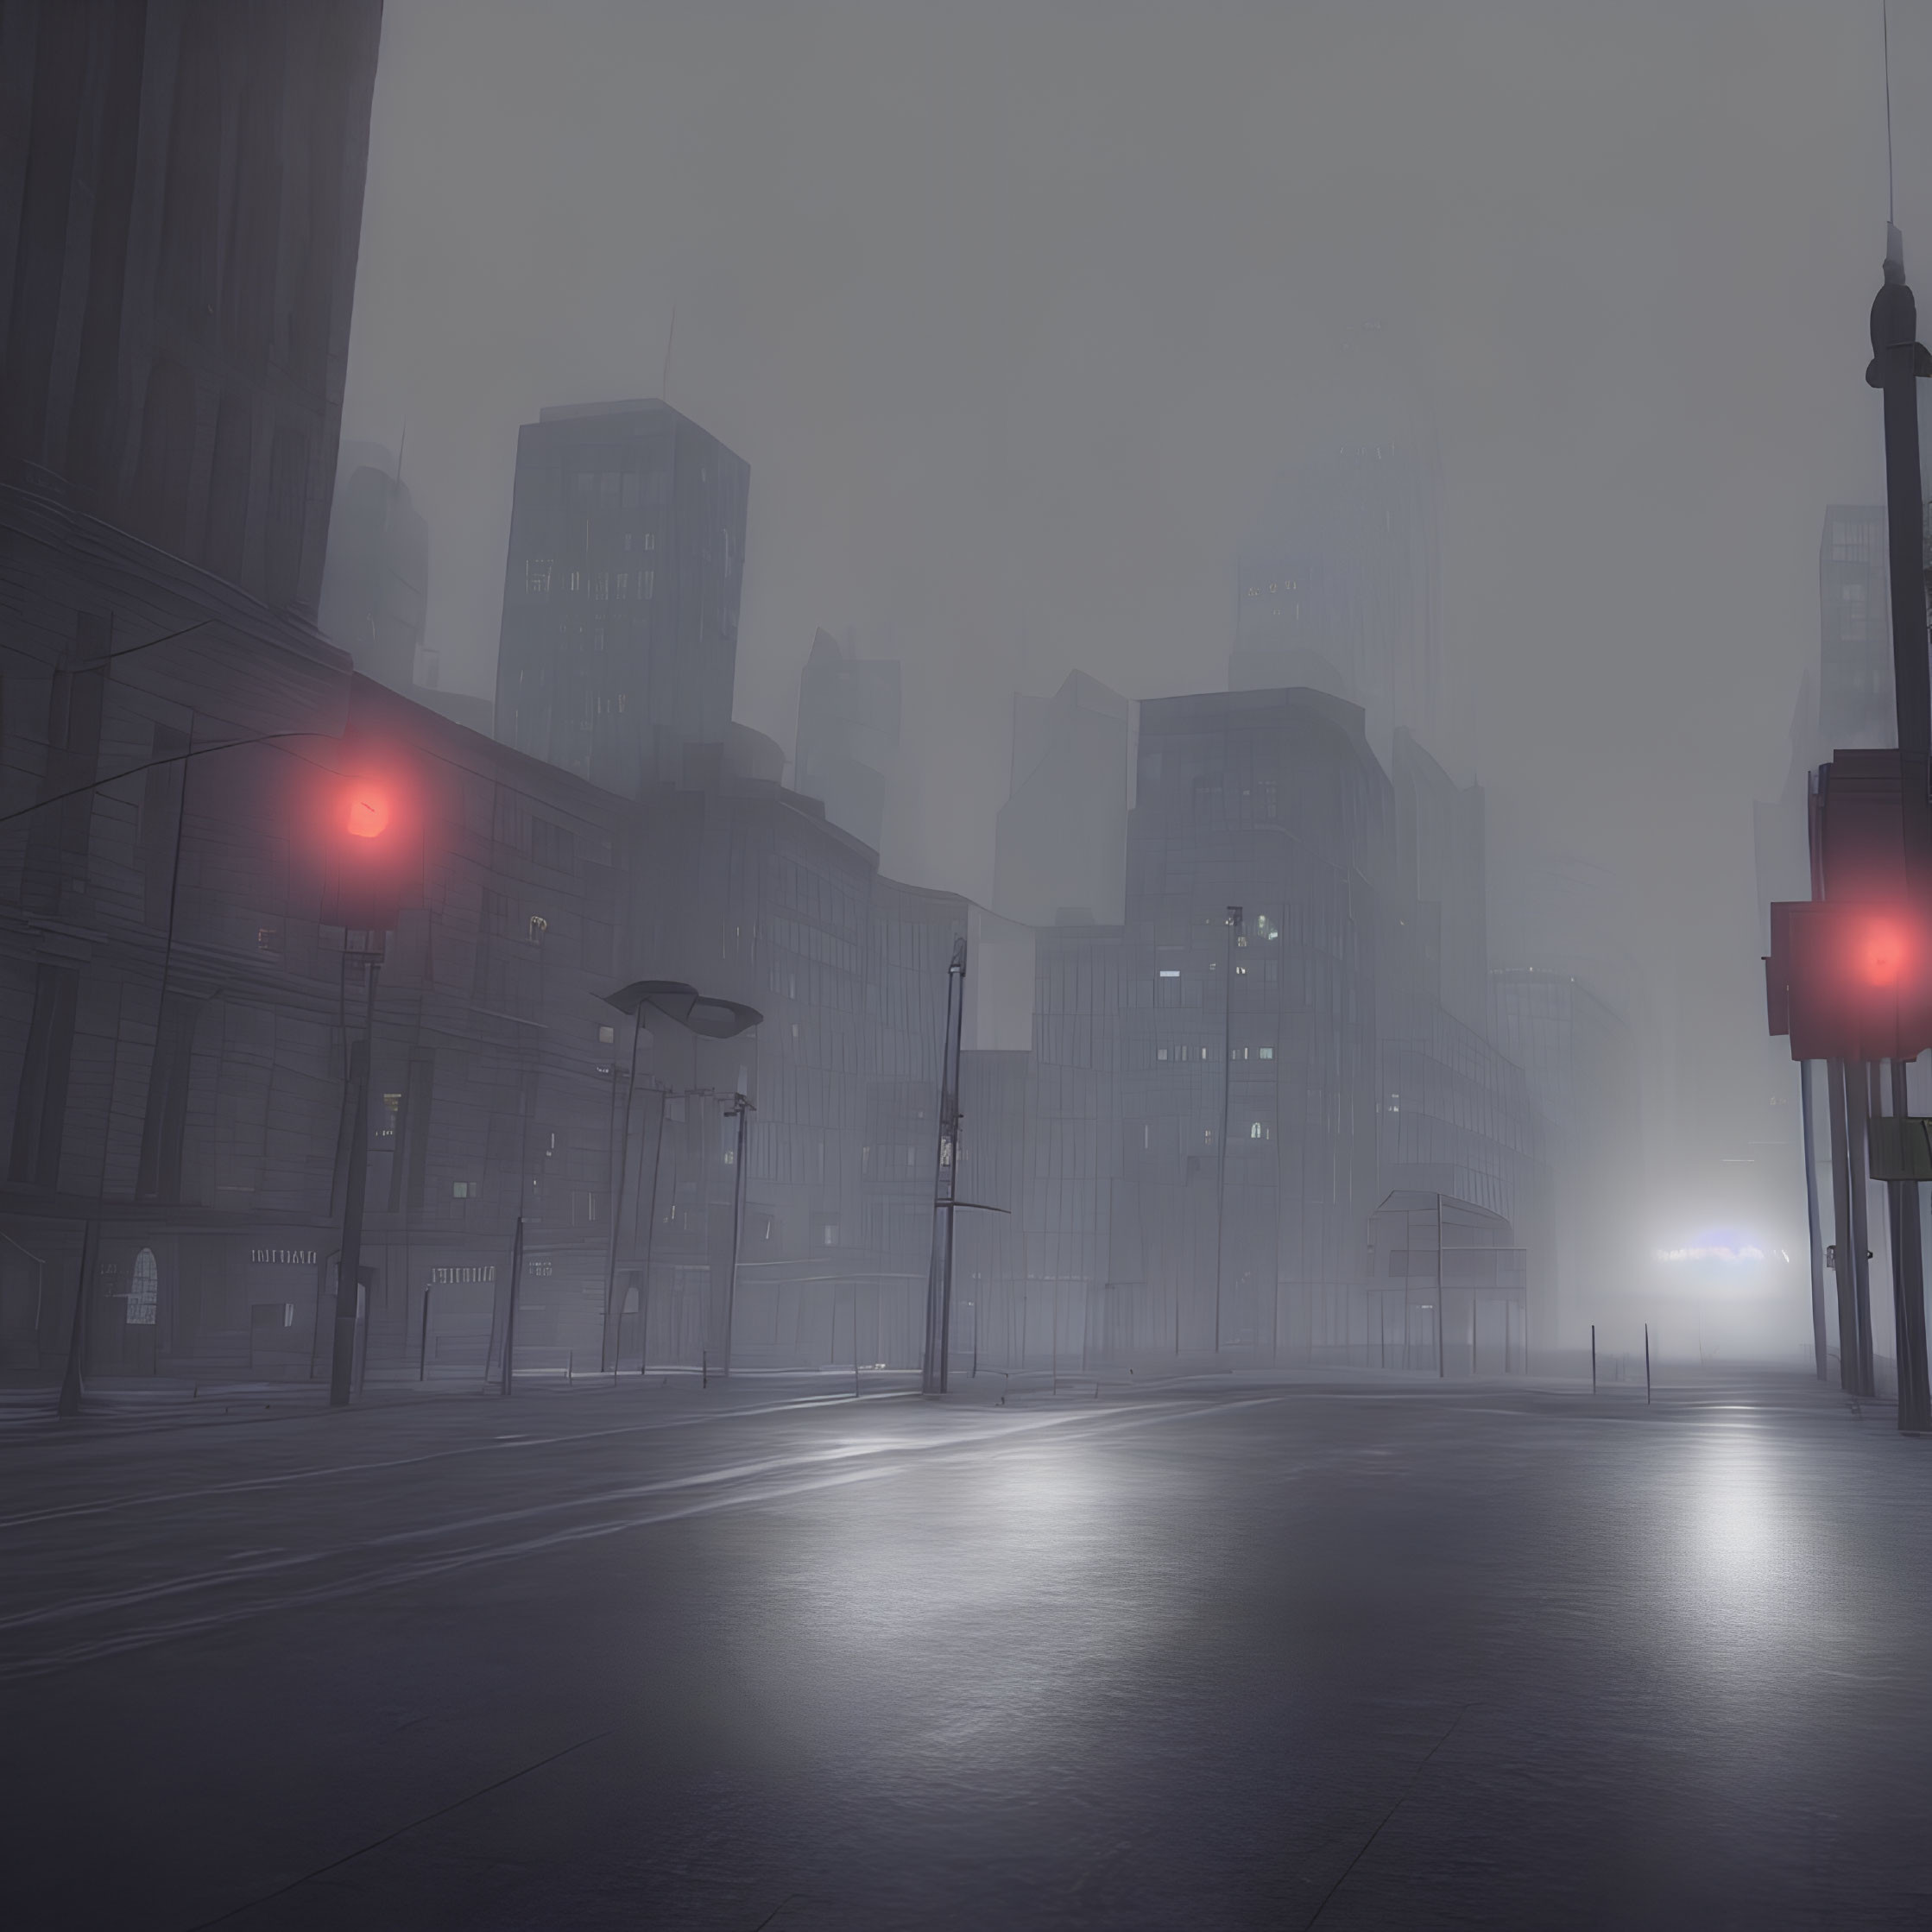 Deserted city street at twilight with red traffic lights and foggy atmosphere.